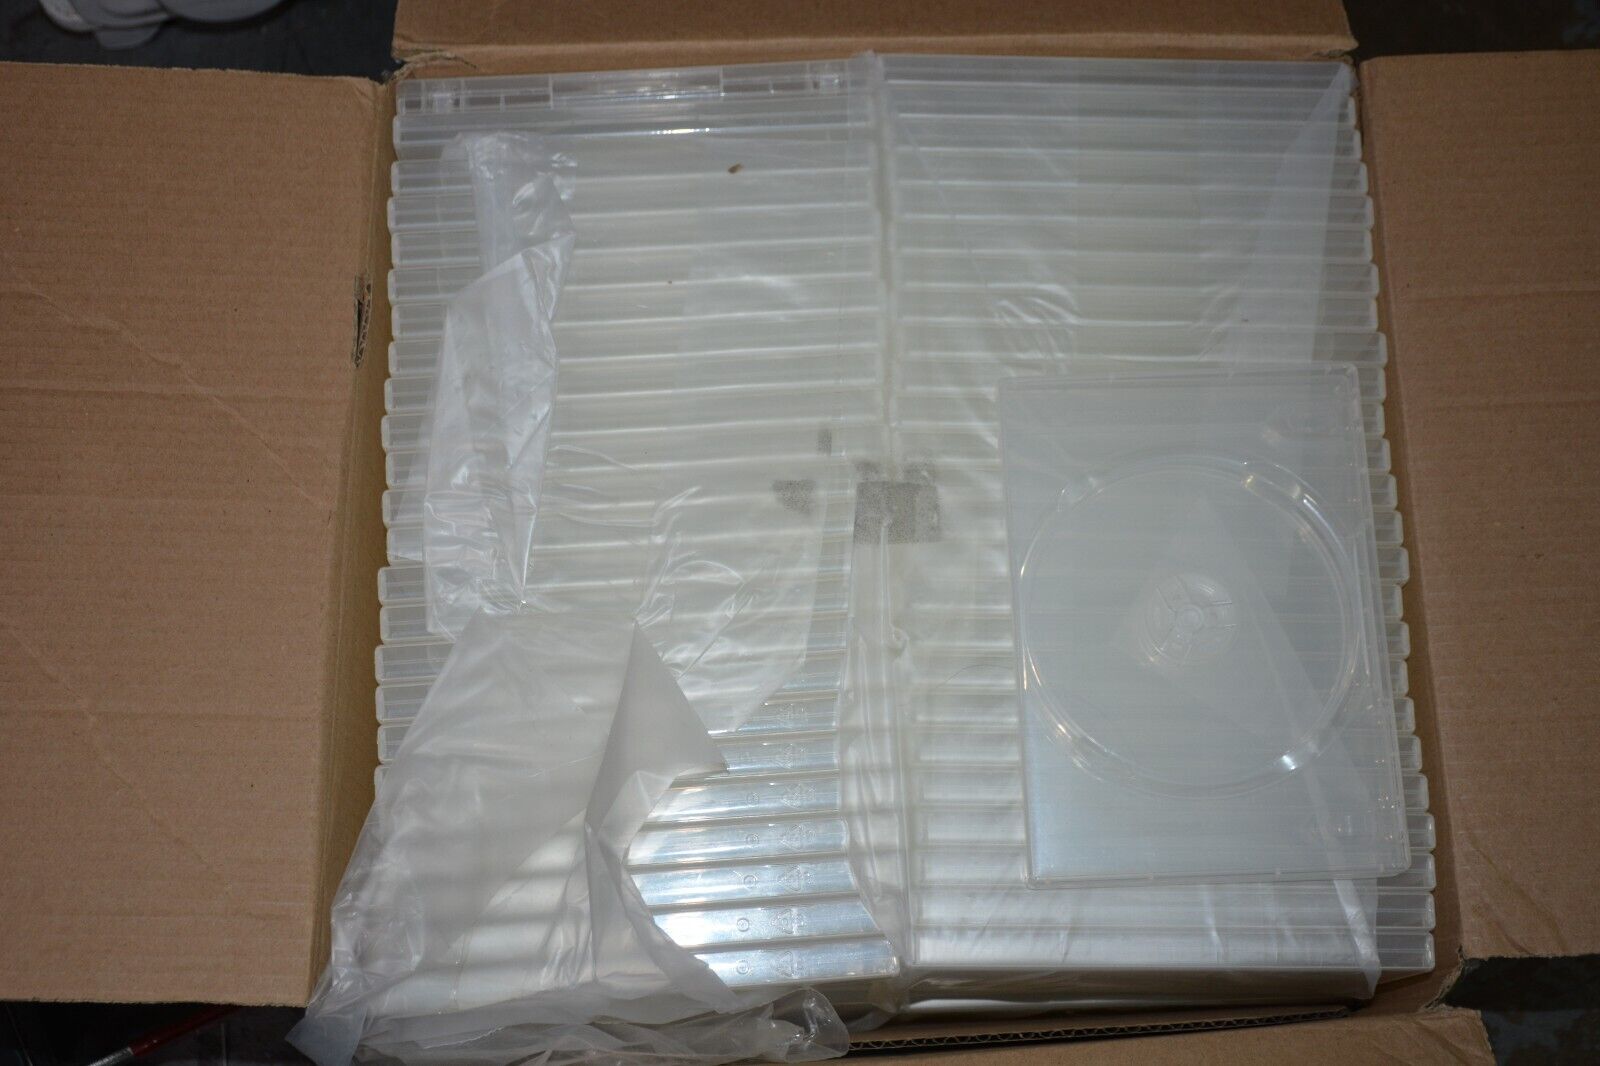 PREMIUM STANDARD Double DVD Cases 14MM (100% New Material) Lot